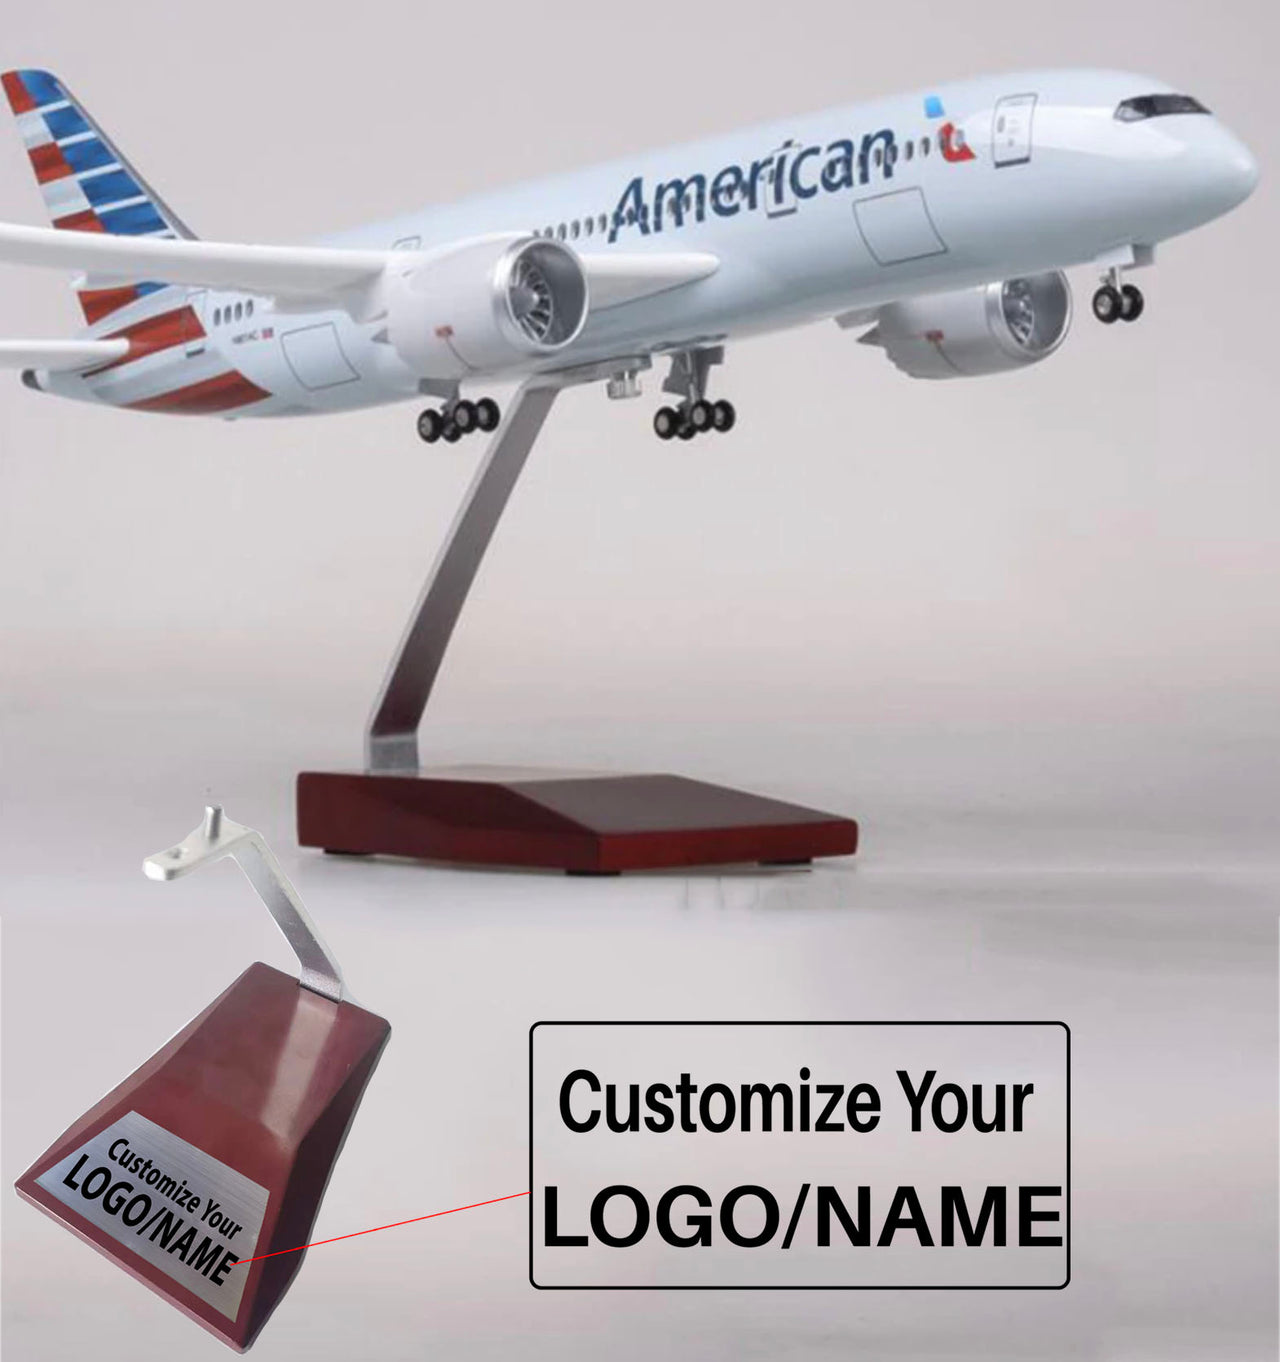 American Airlines Boeing 787 Airplane Model (1/130 Scale)